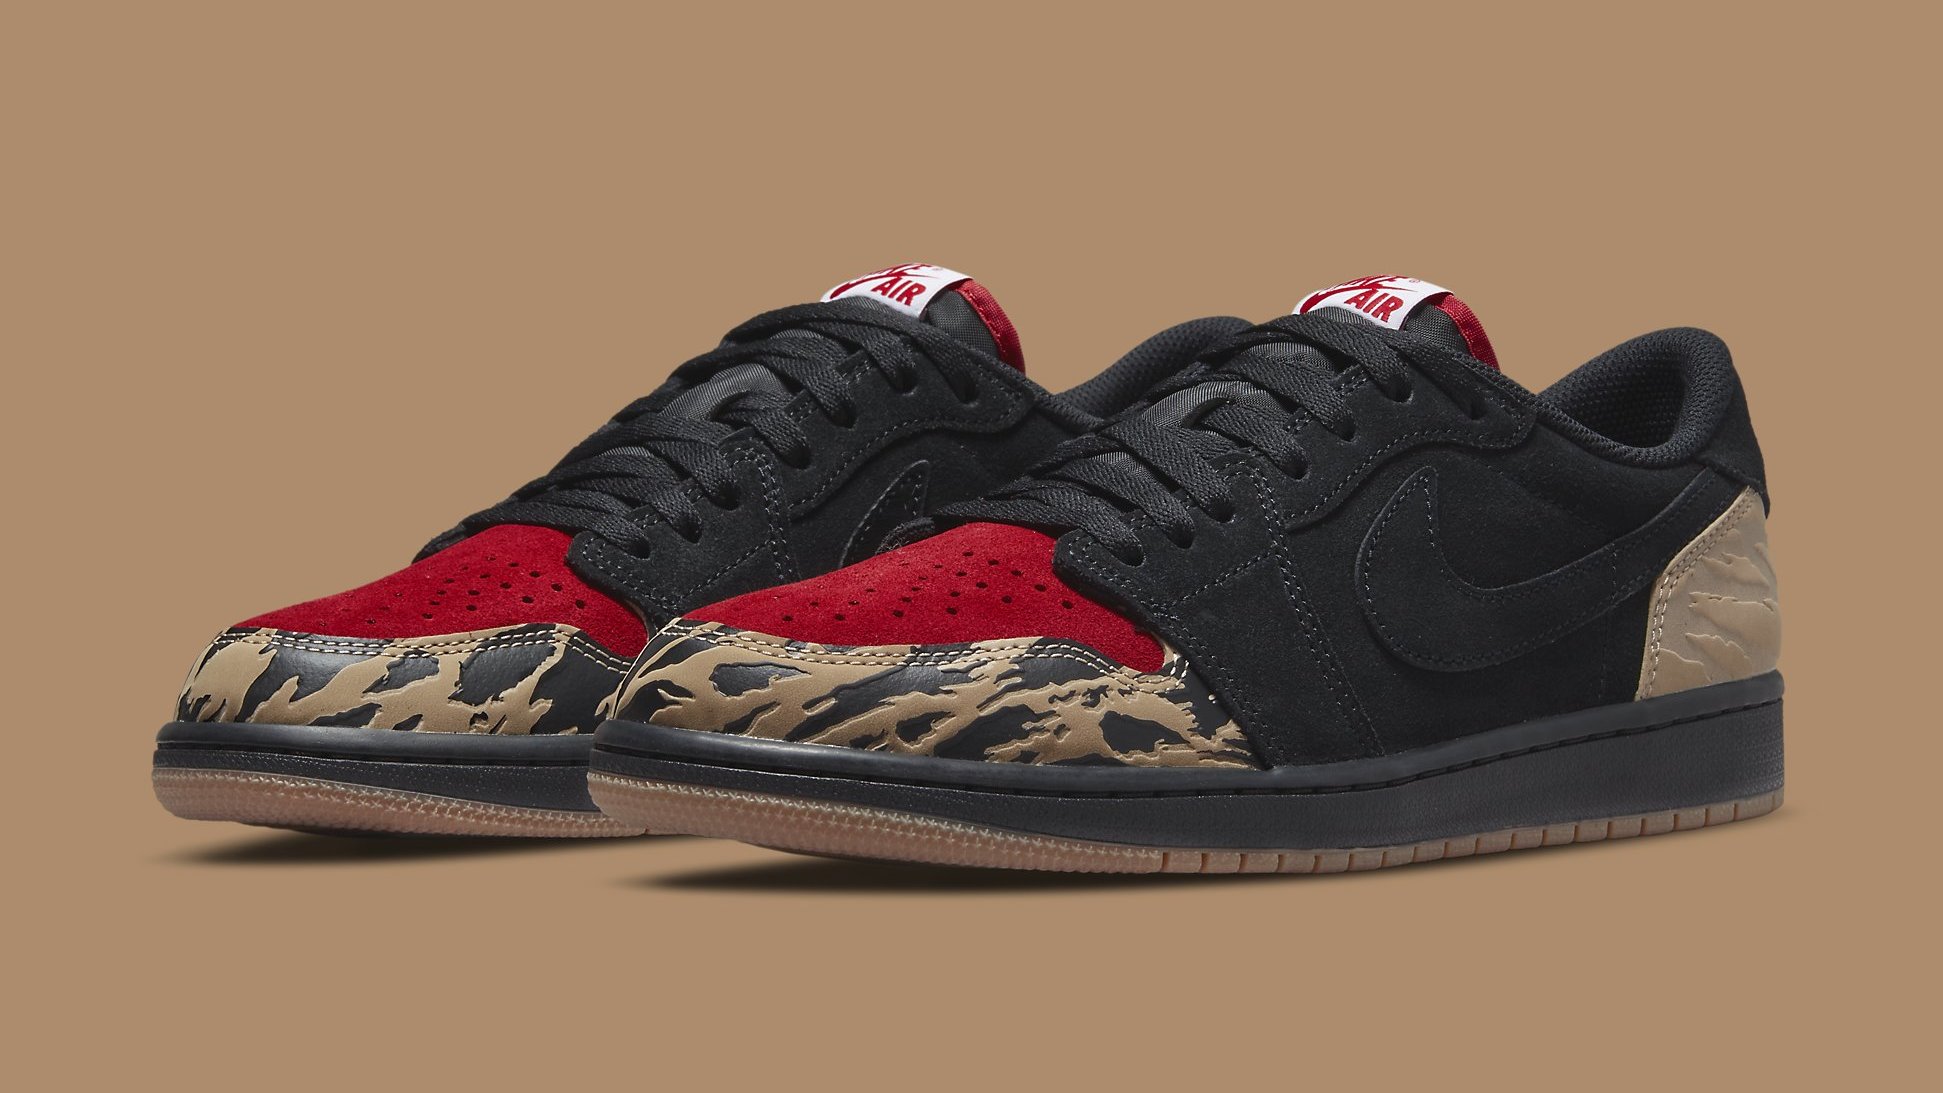 SoleFly x Air Jordan 1 Low Collab Release Date DN3400 001 | Sole